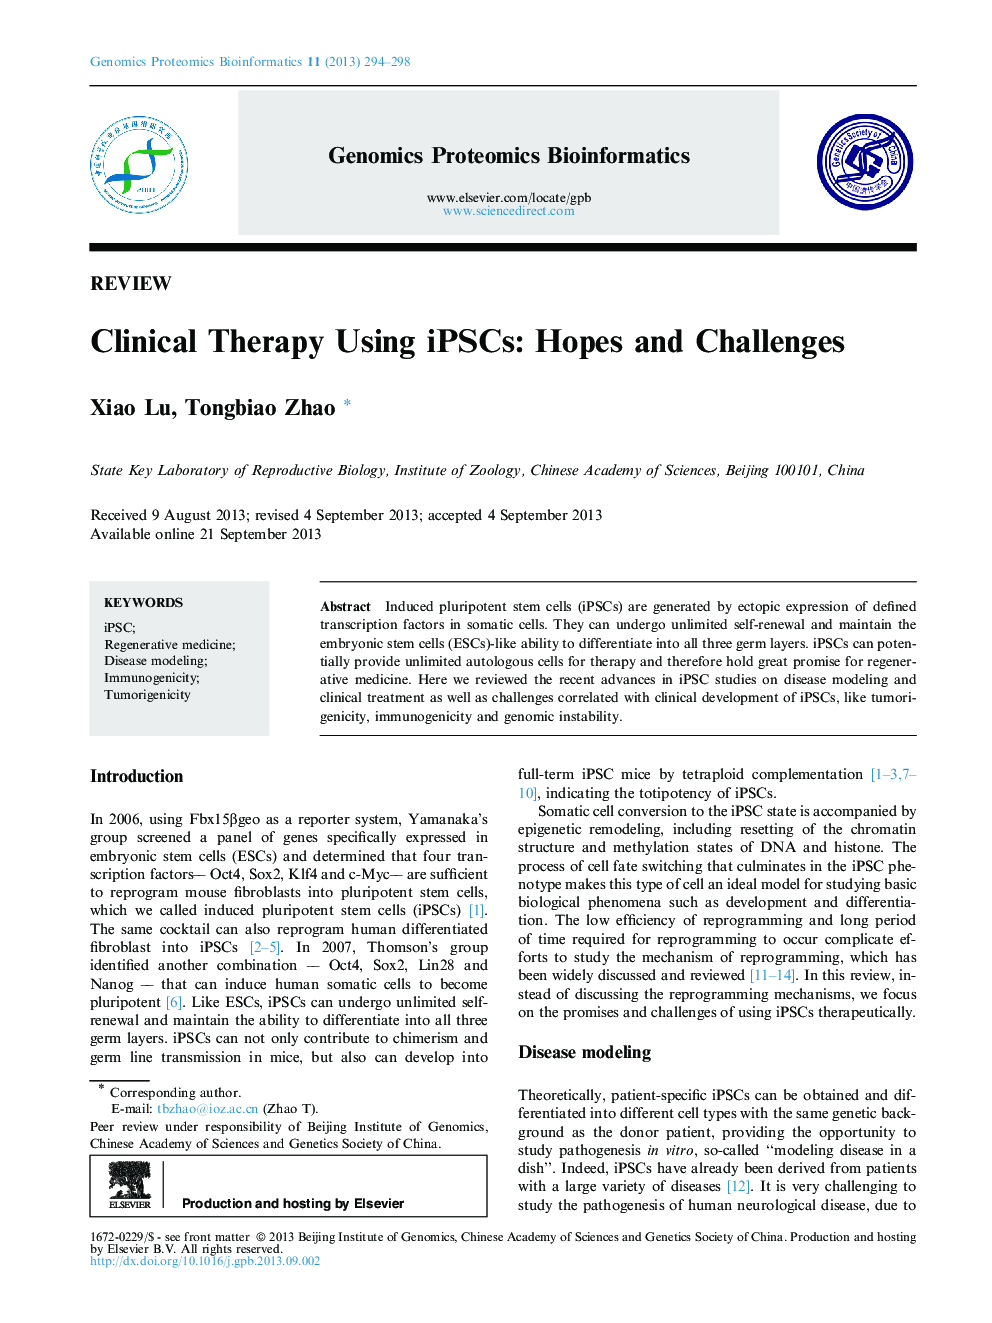 Clinical Therapy Using iPSCs: Hopes and Challenges 